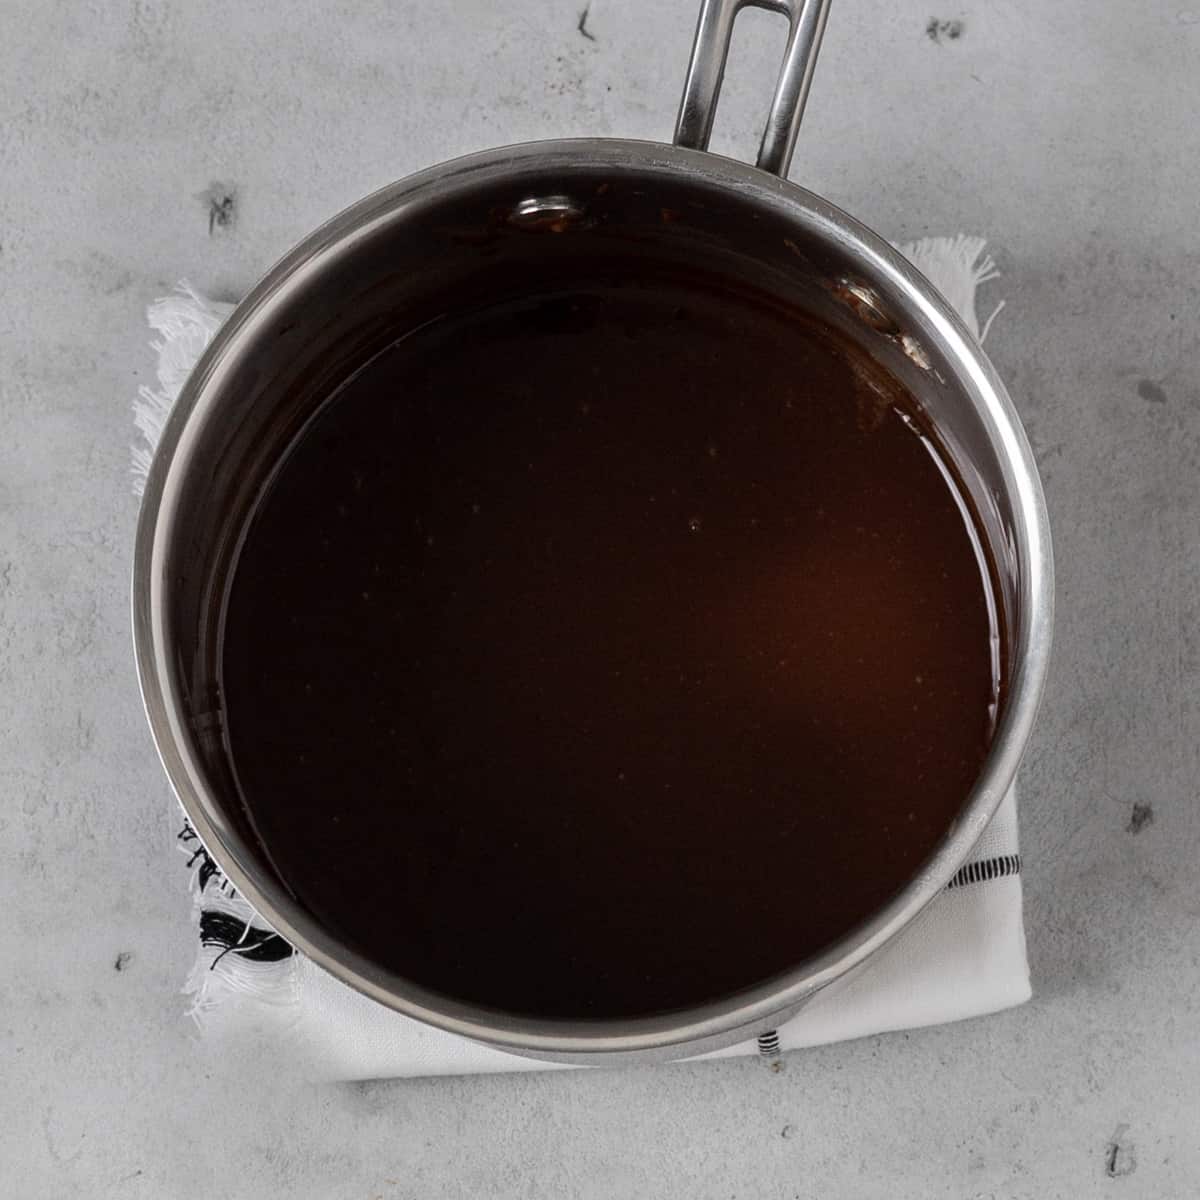 the butter and chocolate melted together in a small stainless steel saucepan on a grey background.